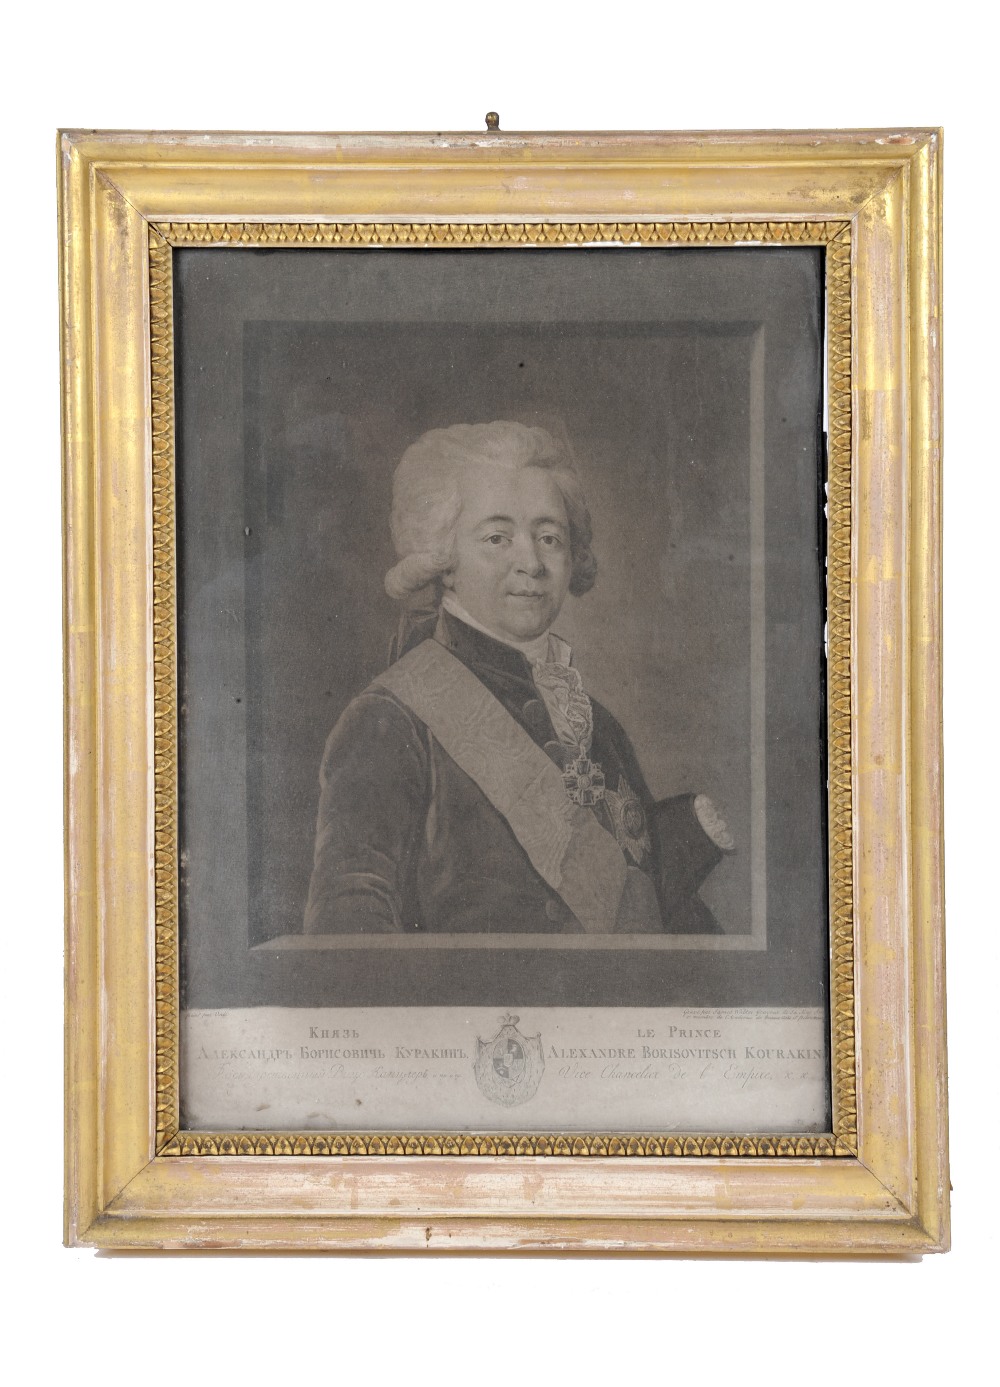 Collection of 18th-century framed mezzotint portraits: 'Jonas Hanway Esquire' (English traveller - Image 3 of 4